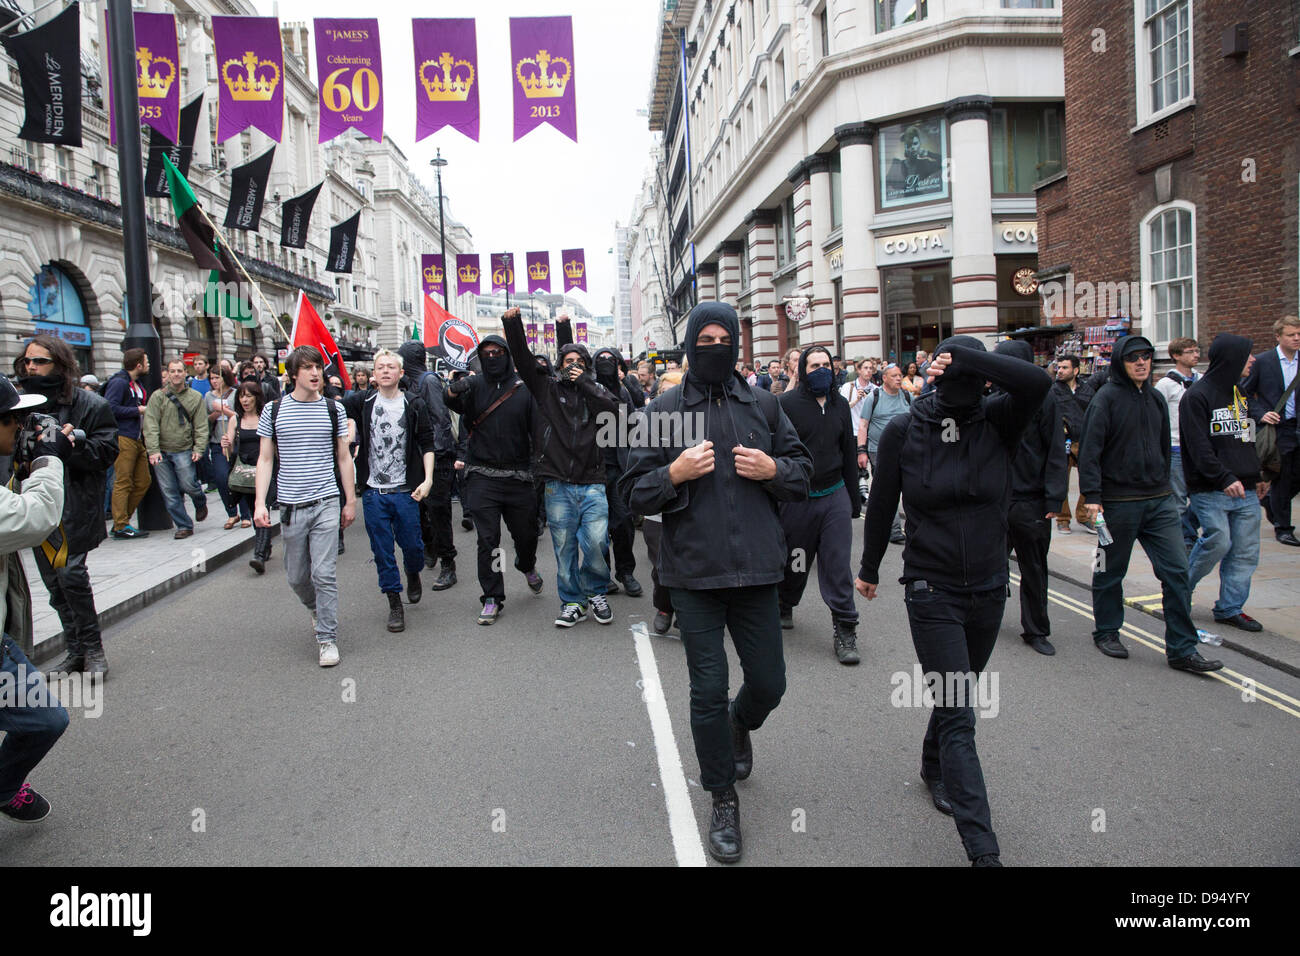 London, UK. 11th June 2013. Anti G8 protesters dressed in black are marching while holding banners and flags. Credit:  Lydia Pagoni/Alamy Live News Stock Photo